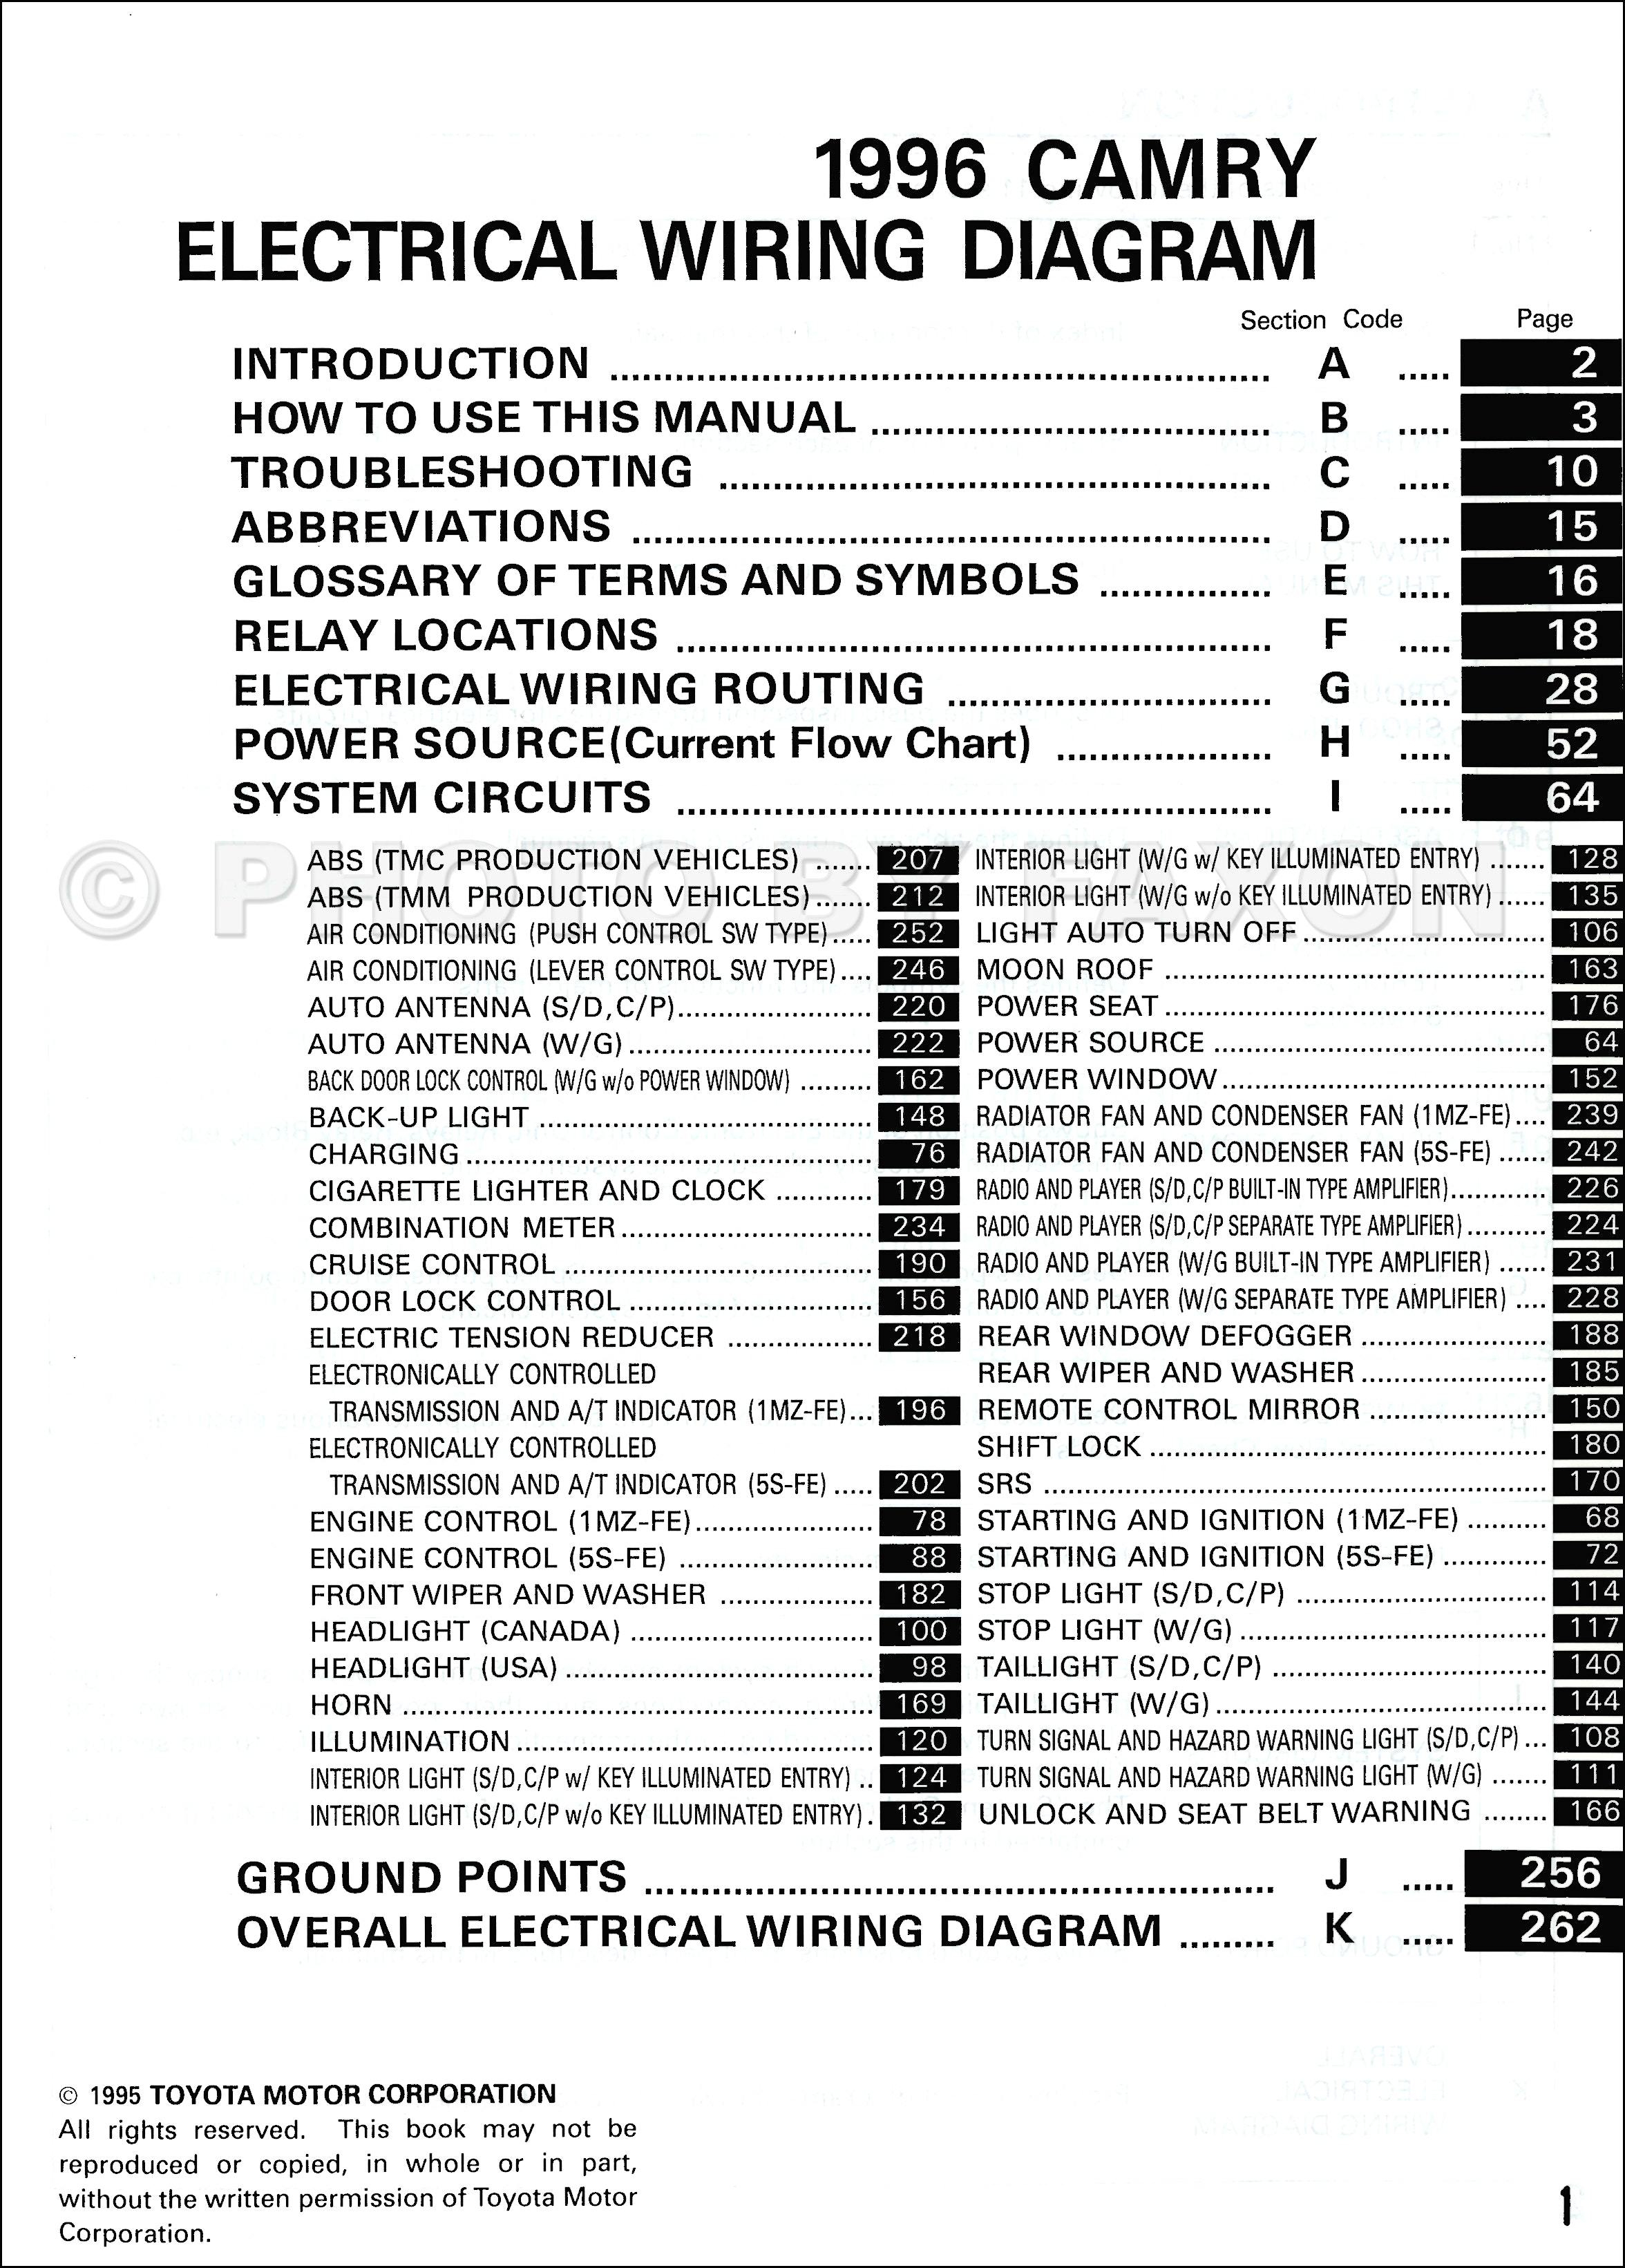 1996 Toyota Avalon Stereo Wiring Diagram - All Wiring Diagram Data - Toyota Tacoma Stereo Wiring Diagram